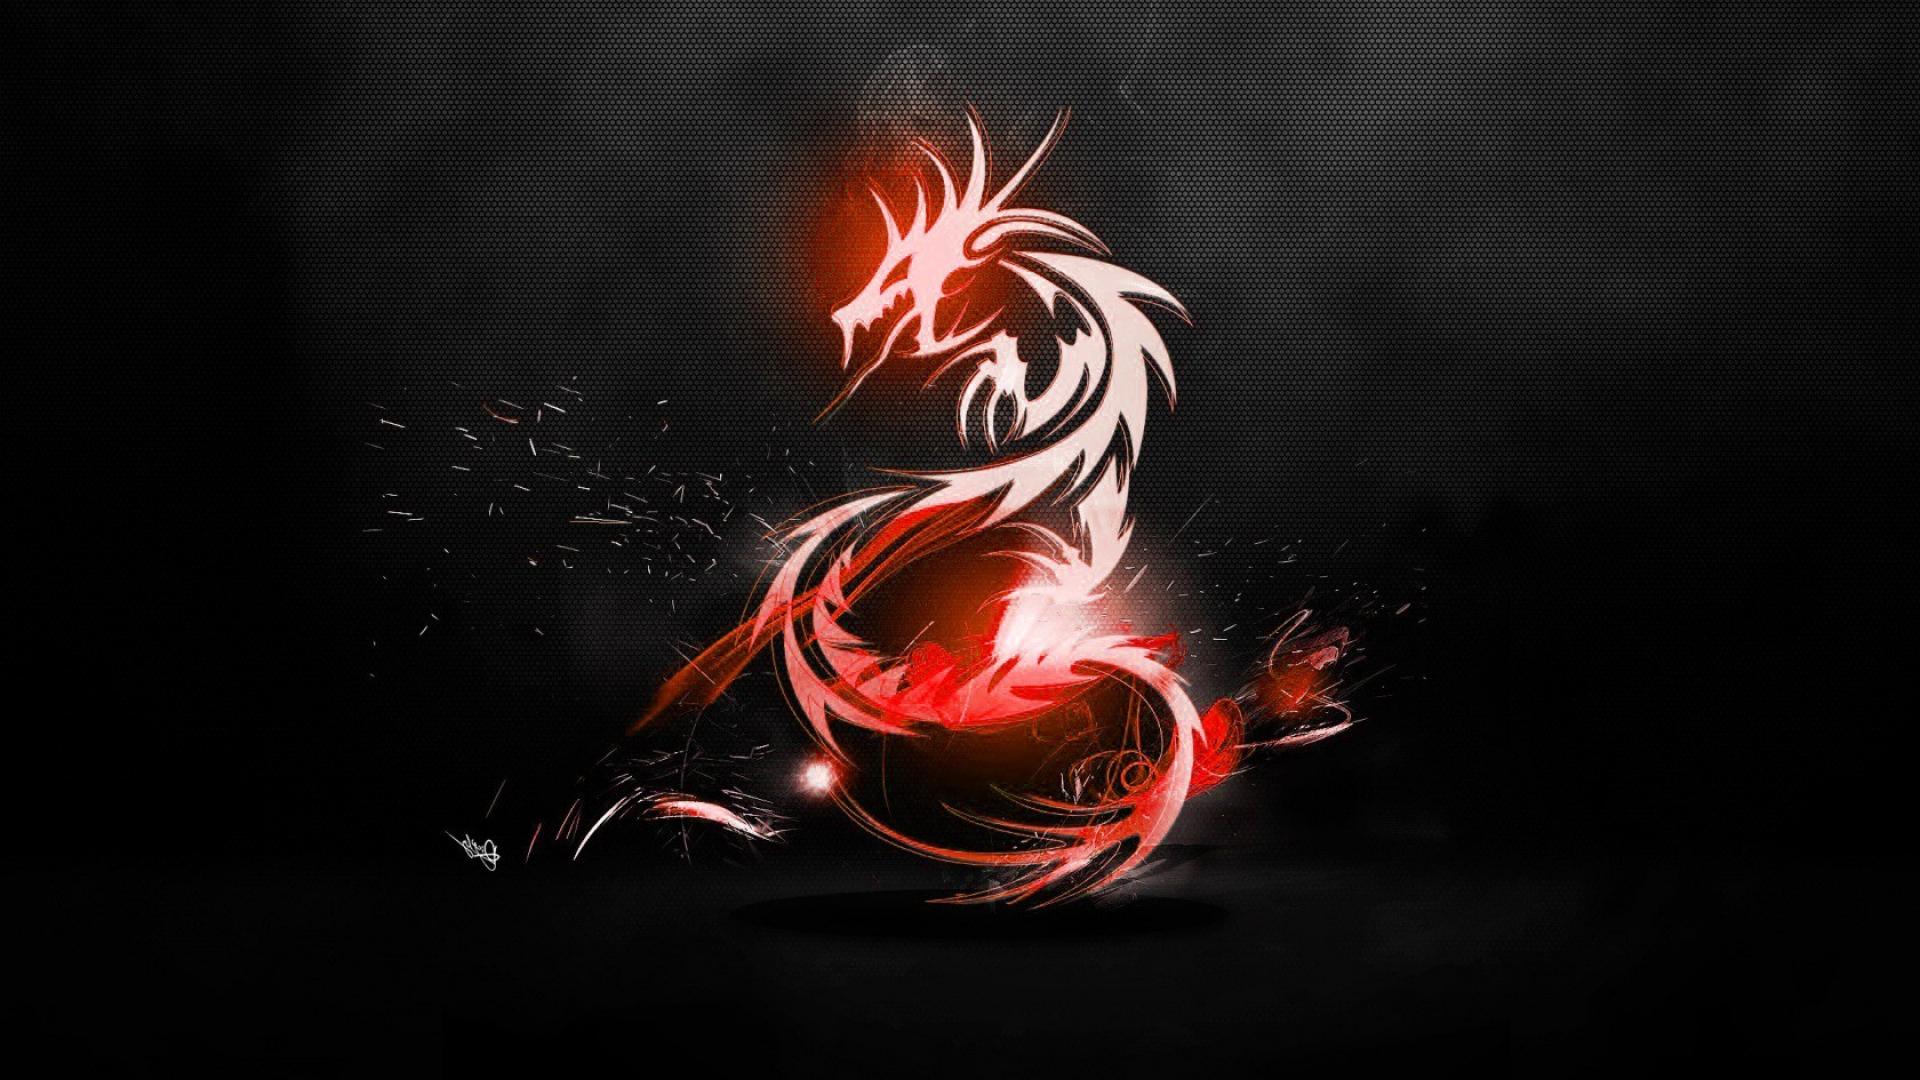 Red And Black Dragon Wallpapers